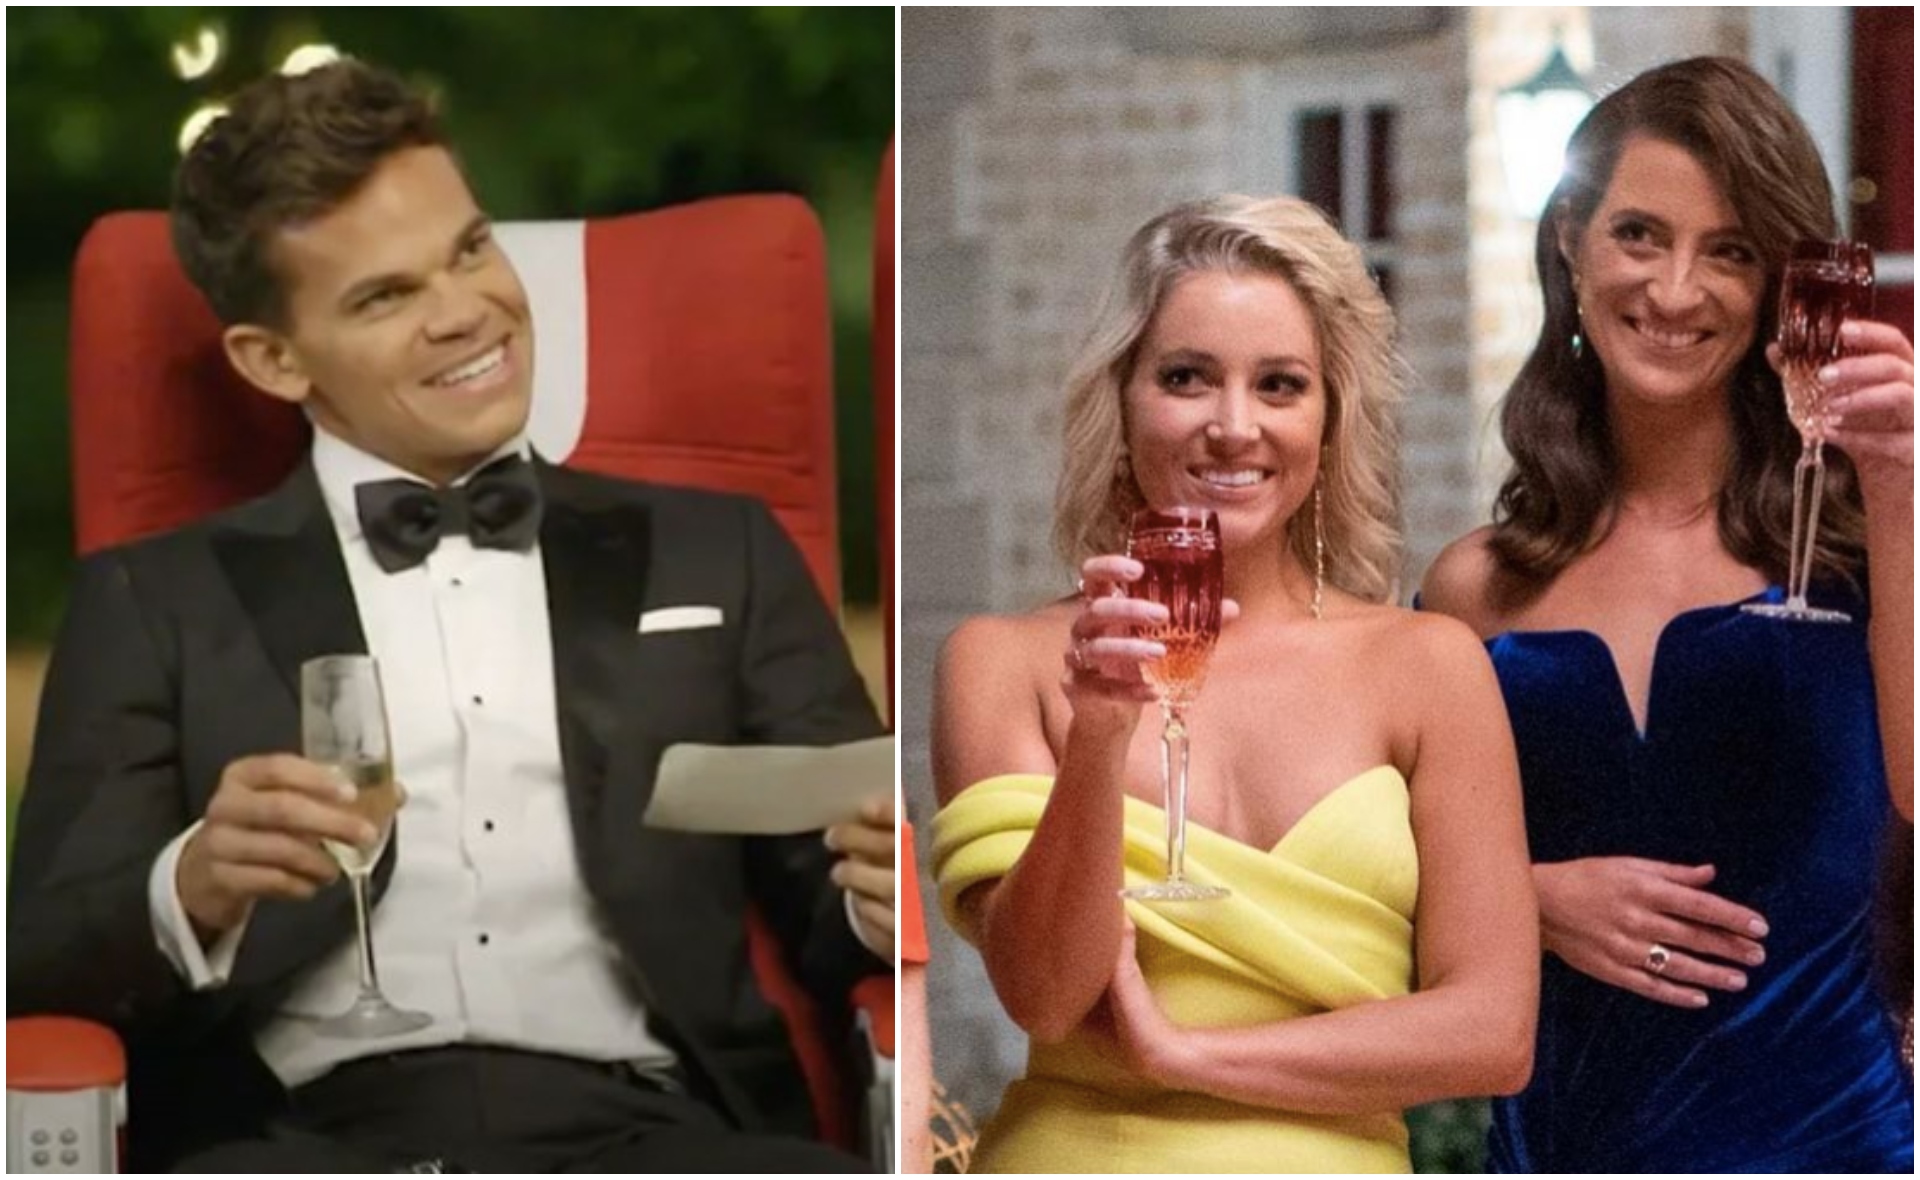 A four-night cocktail party and a hairdressing disaster: The biggest secrets from behind the scenes of The Bachelor